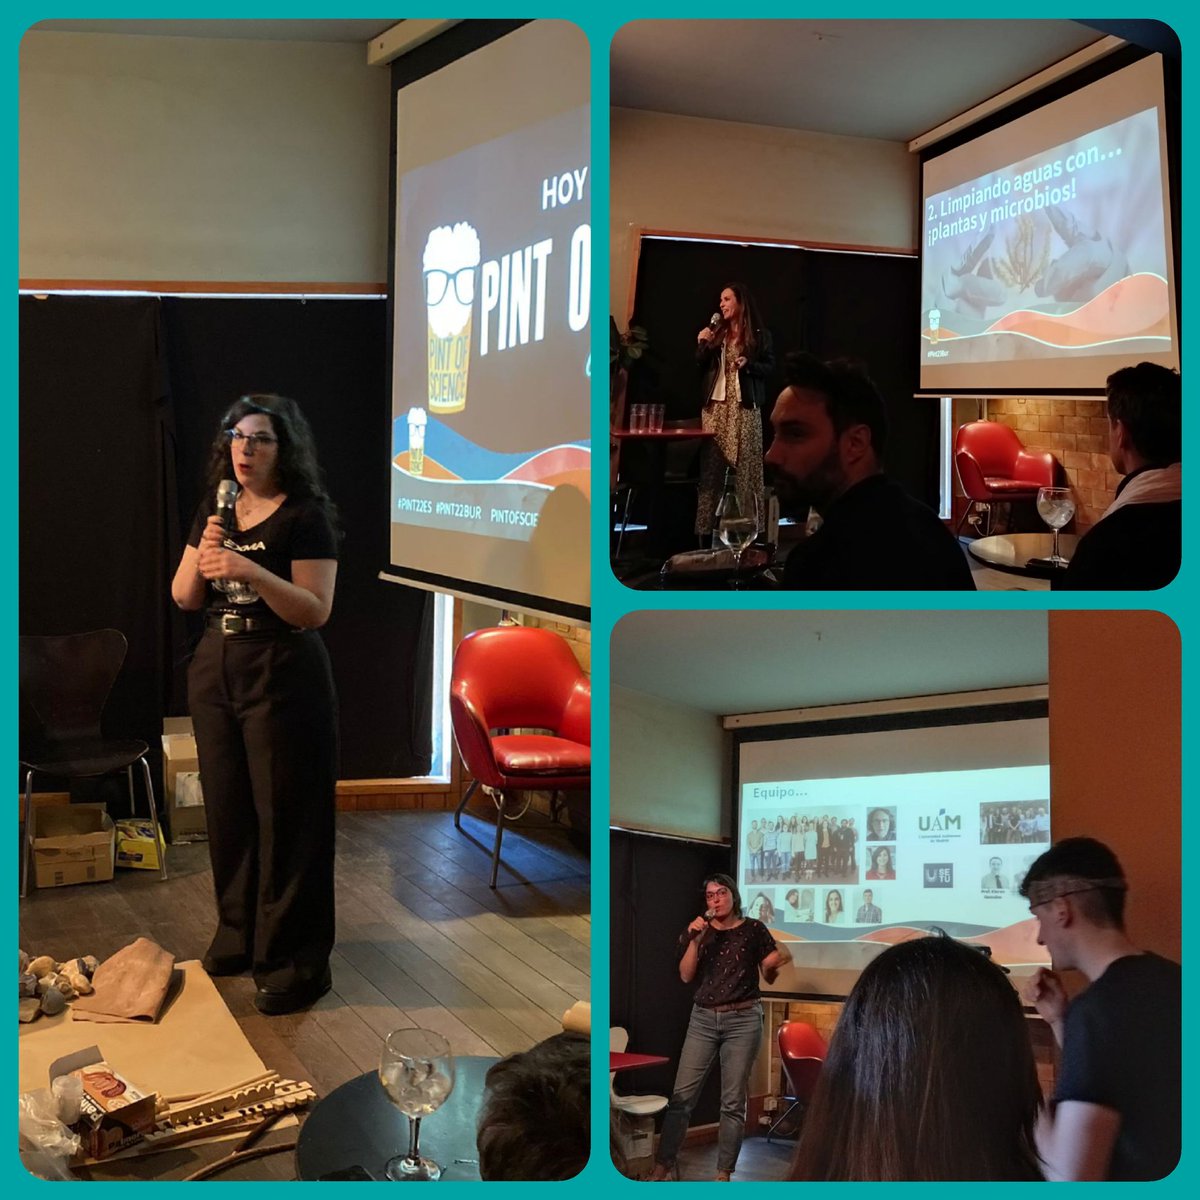 Great success today in #PINT23BUR #PINT23ES @pintofscienceES  with @Angela_varnei and, Rocío Barros - Blanca Velasco from @ICCRAM_UBU (@biosysmo @Tribiomeproject @GreenerH2020)